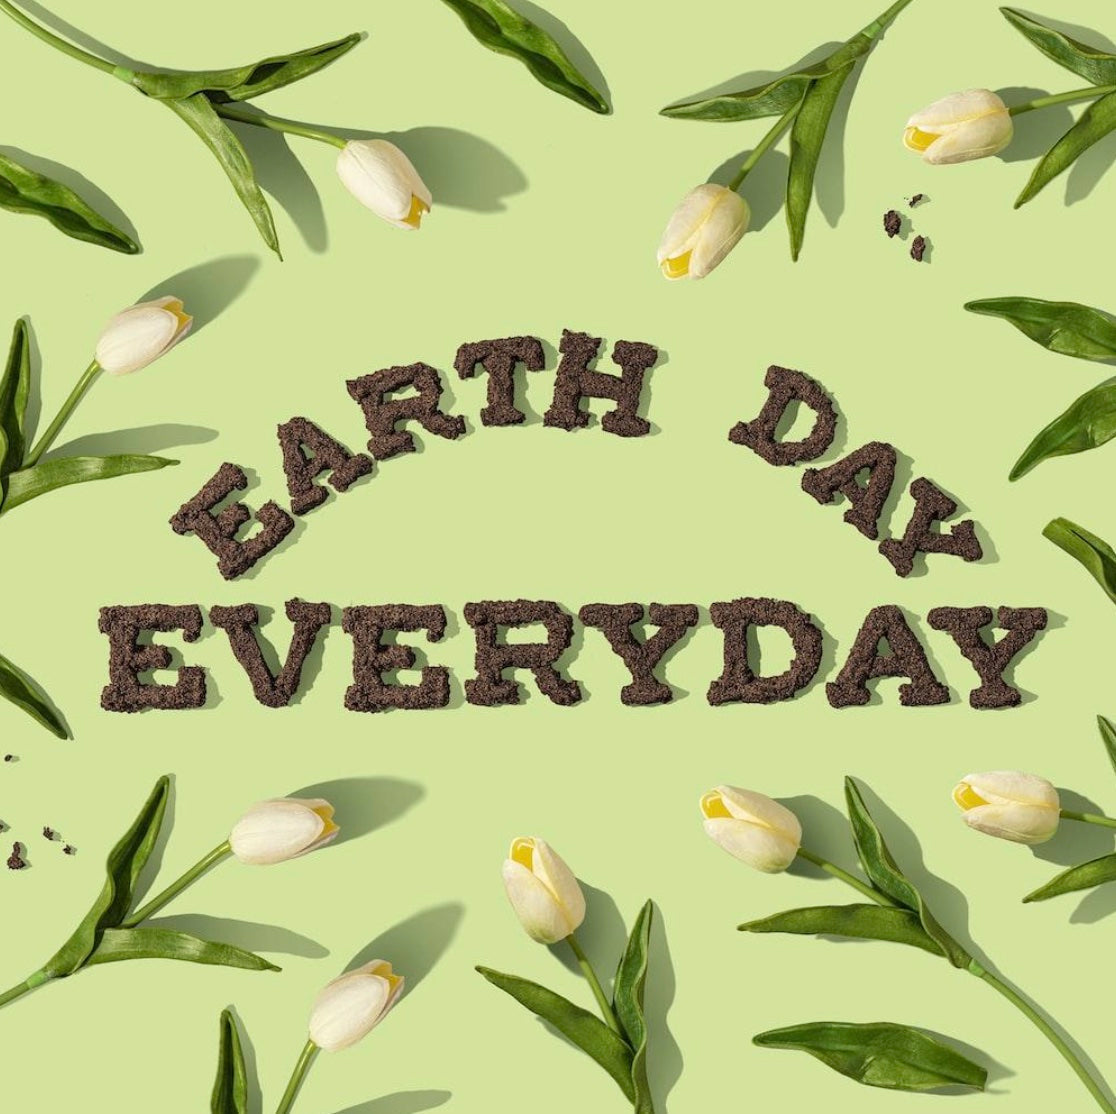 How to Celebrate Earth Day Every Day